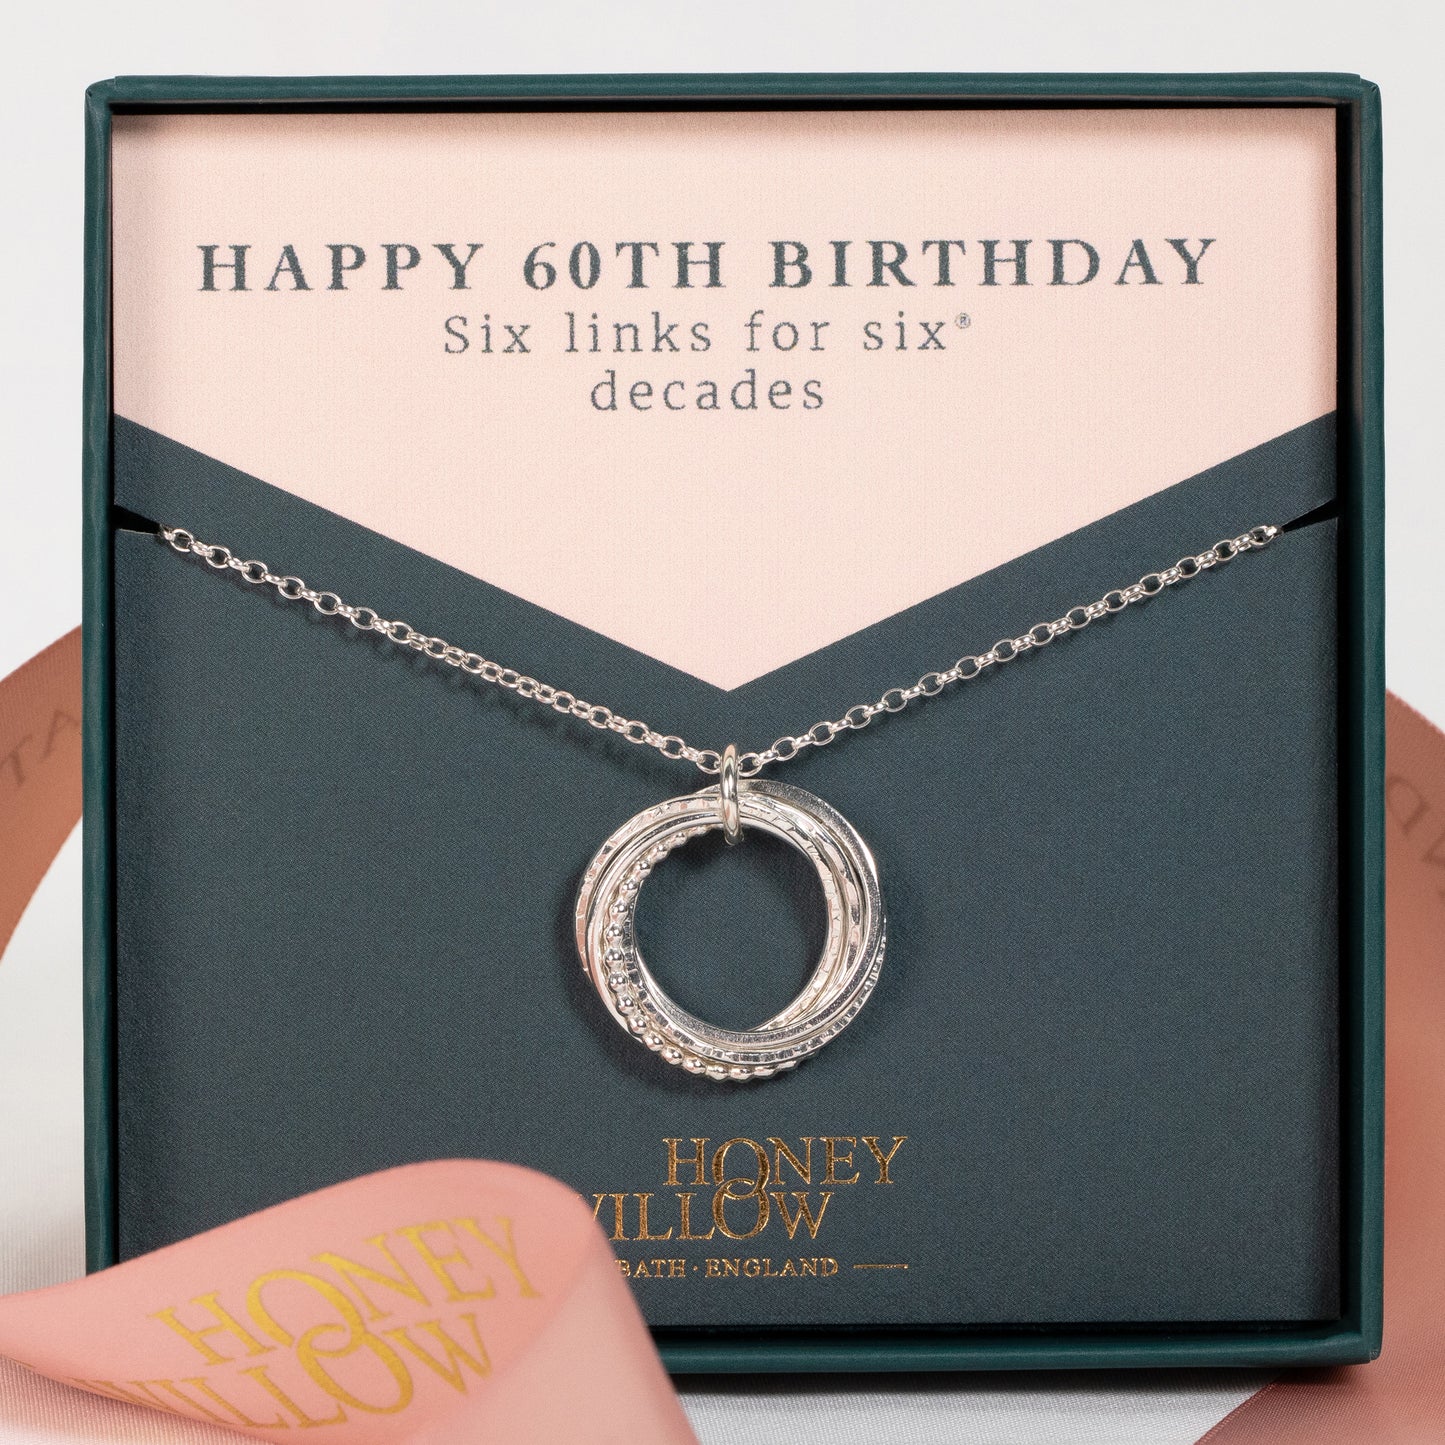 60th Birthday Necklace - The Original 6 Links for 6 Decades Necklace - Silver